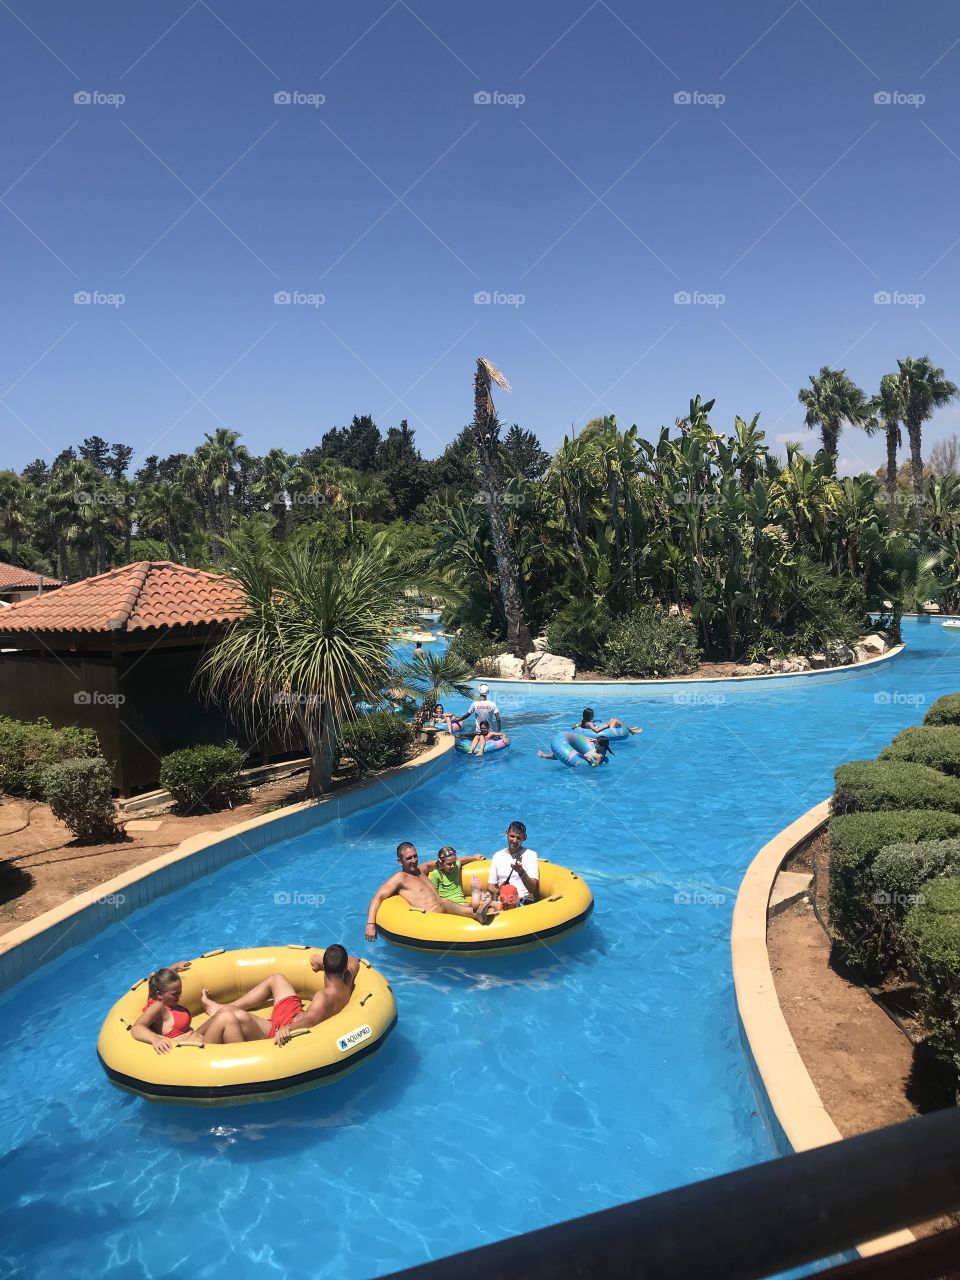 Fasouri waterpark in Cyprus and its lazy river 